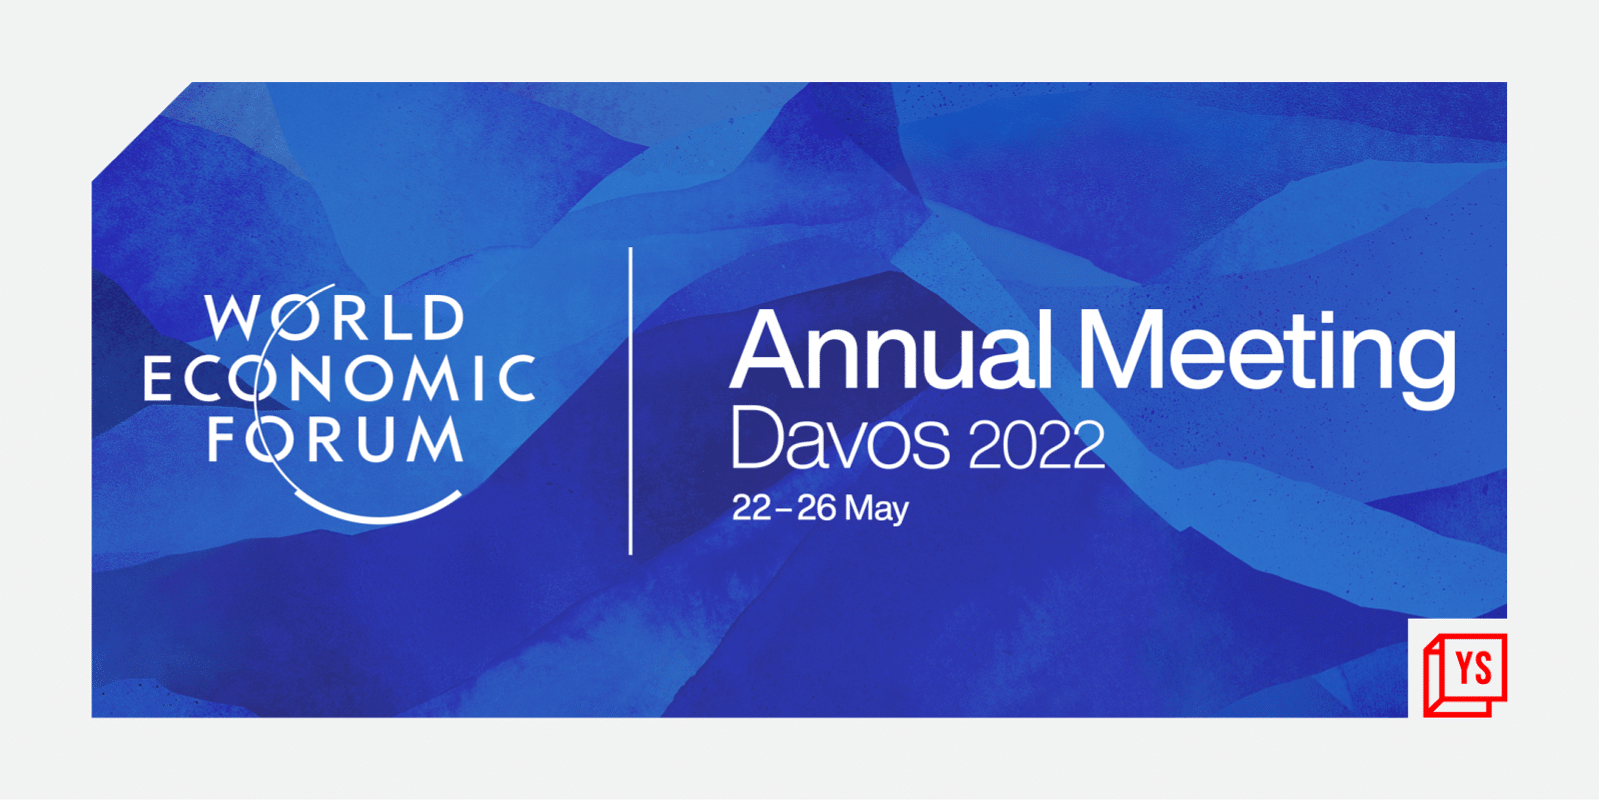 You are currently viewing India sends nearly 100 business leaders to Davos